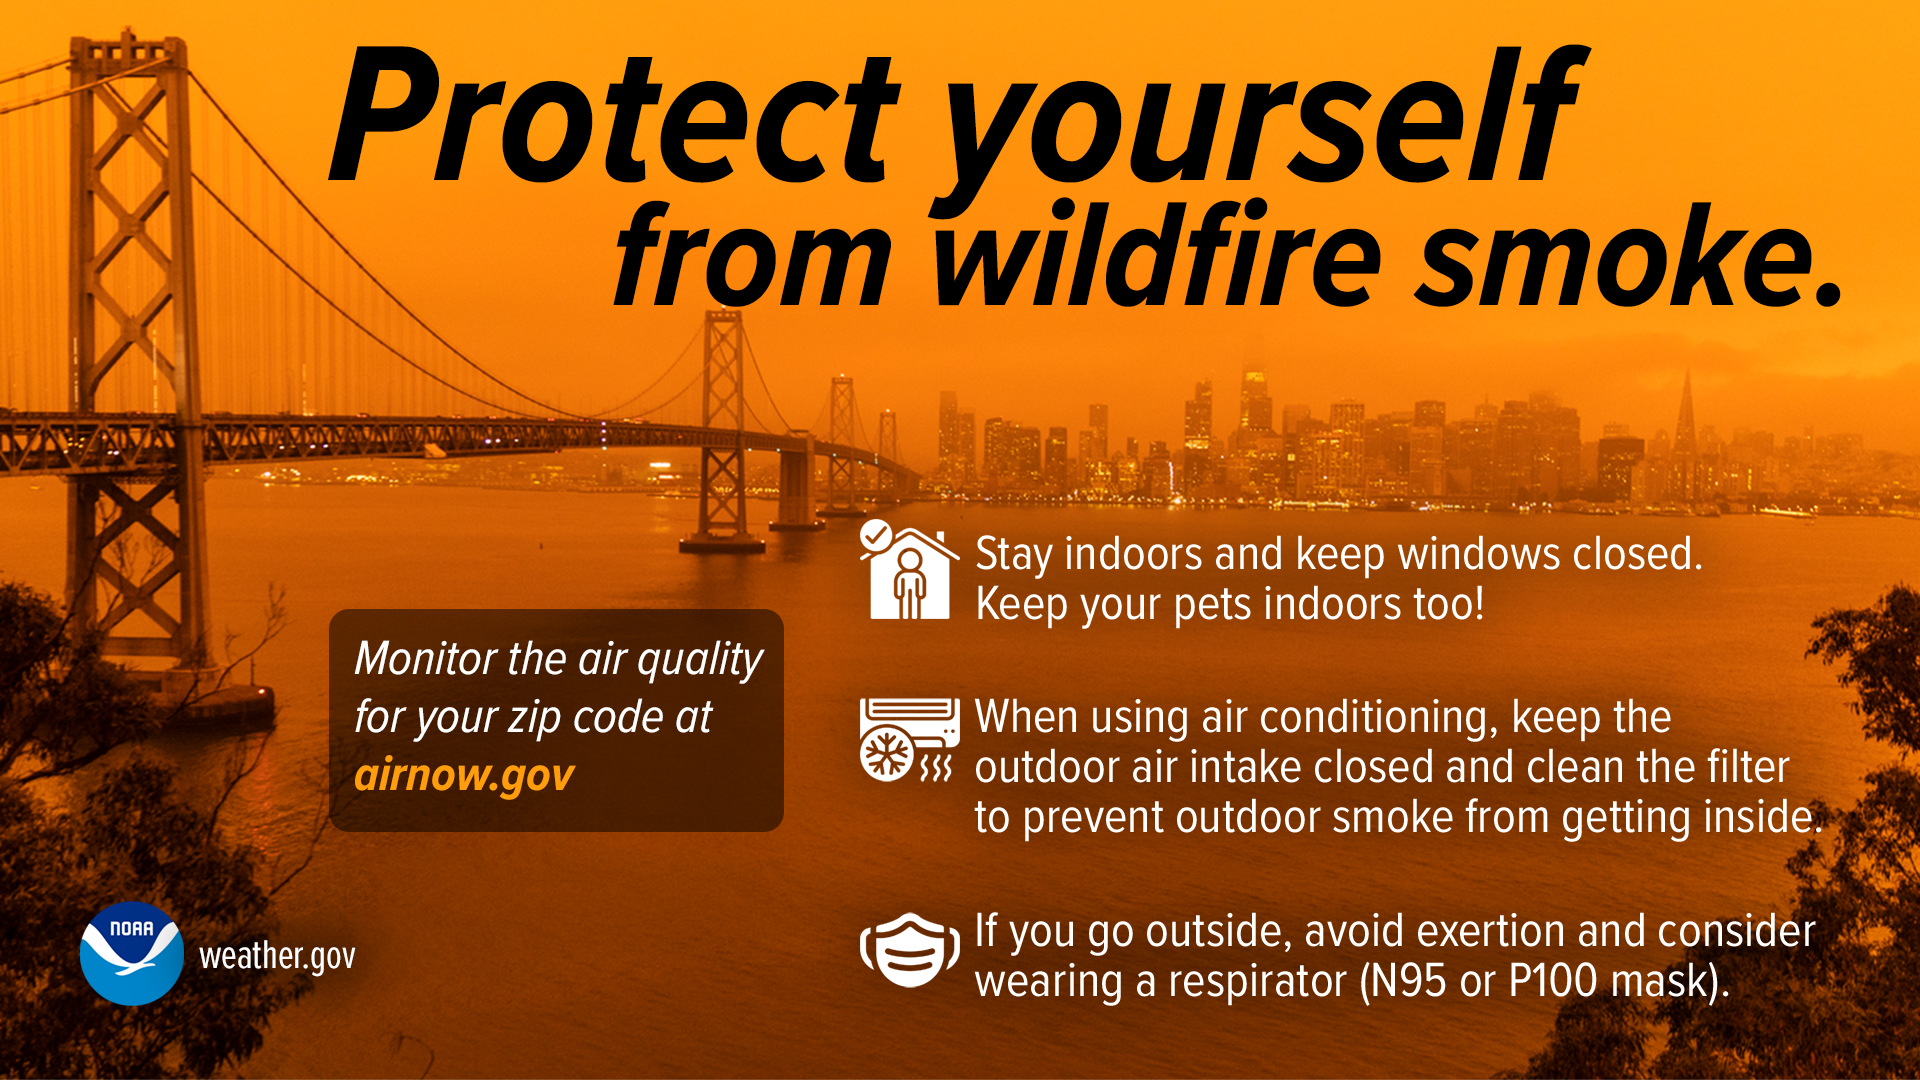 Protect yourself from wildfire smoke. Stay indoors and keep windows closed. Keep your pets indoors too! When using air conditioning, keep the outdoor air intake closed and clean the filter to prevent outdoor smoke getting inside. If you go outside, avoid exertion and consider wearing a respirator (N95 or P100 mask). Monitor the air quality for your zip code at airnow.gov